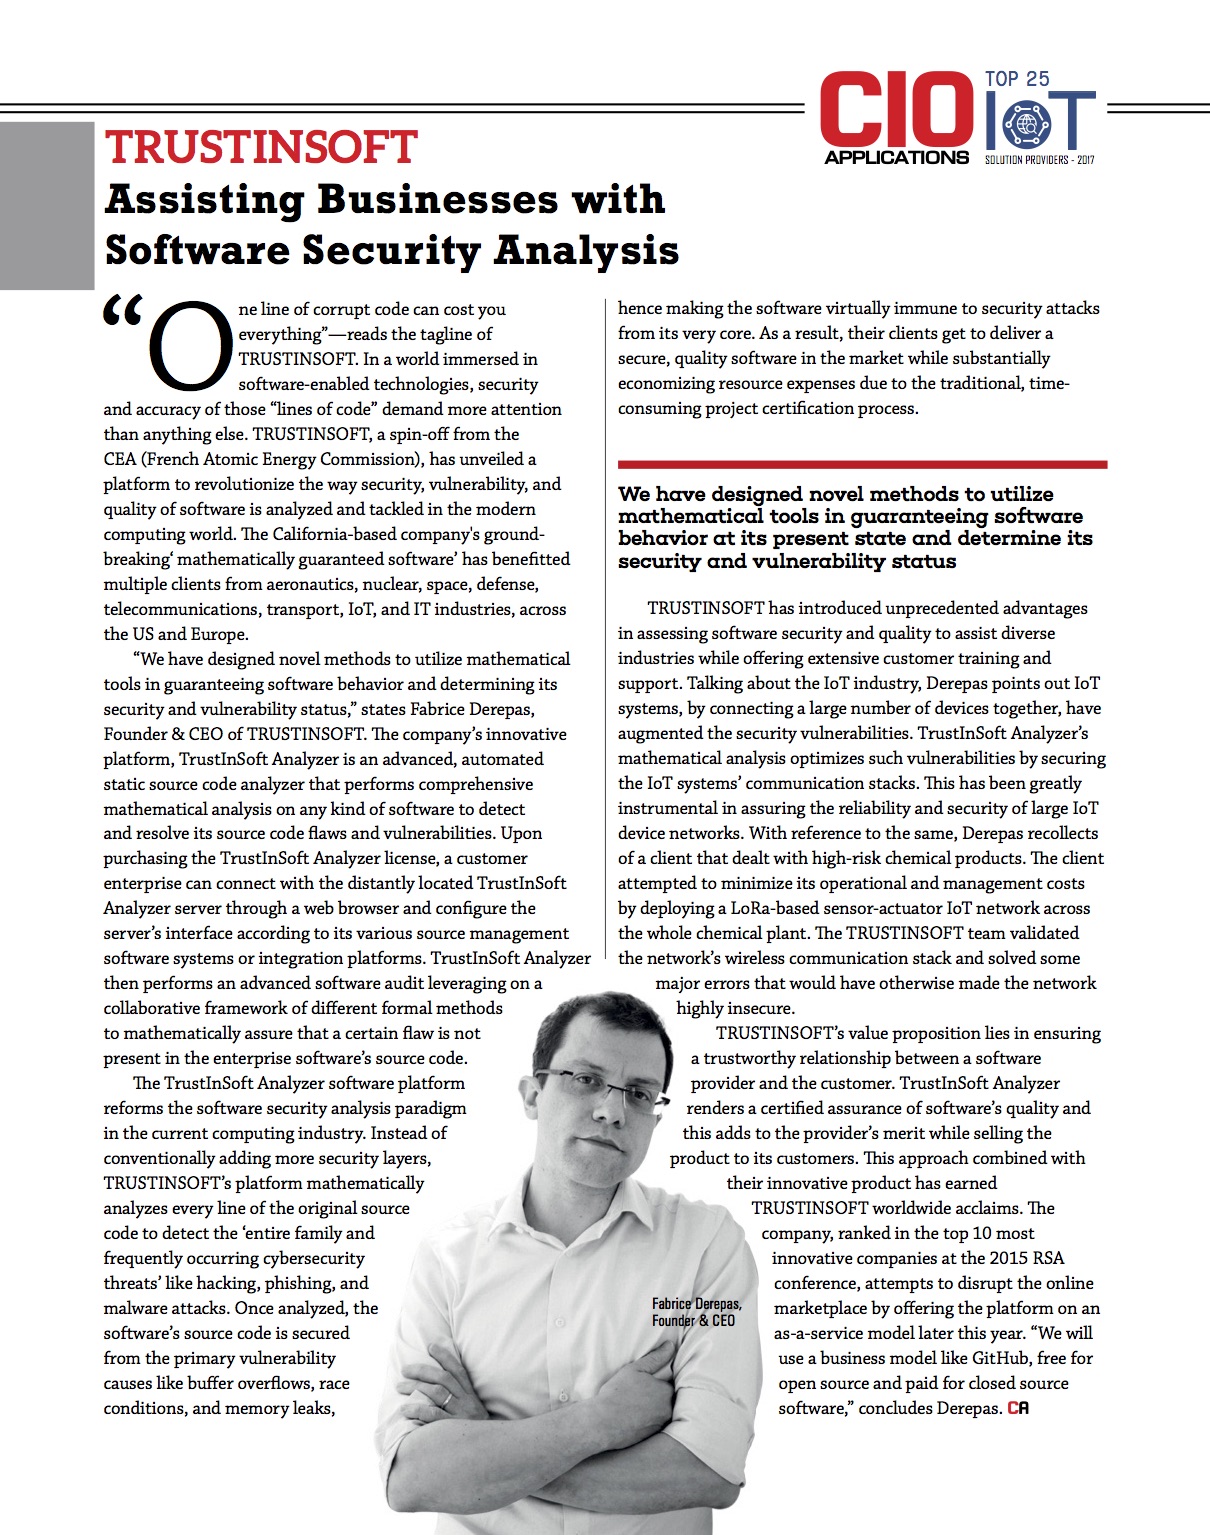 Page from an article interview with Fabrice Derepas, titled TrustInSoft assisting businesses with software security analysis